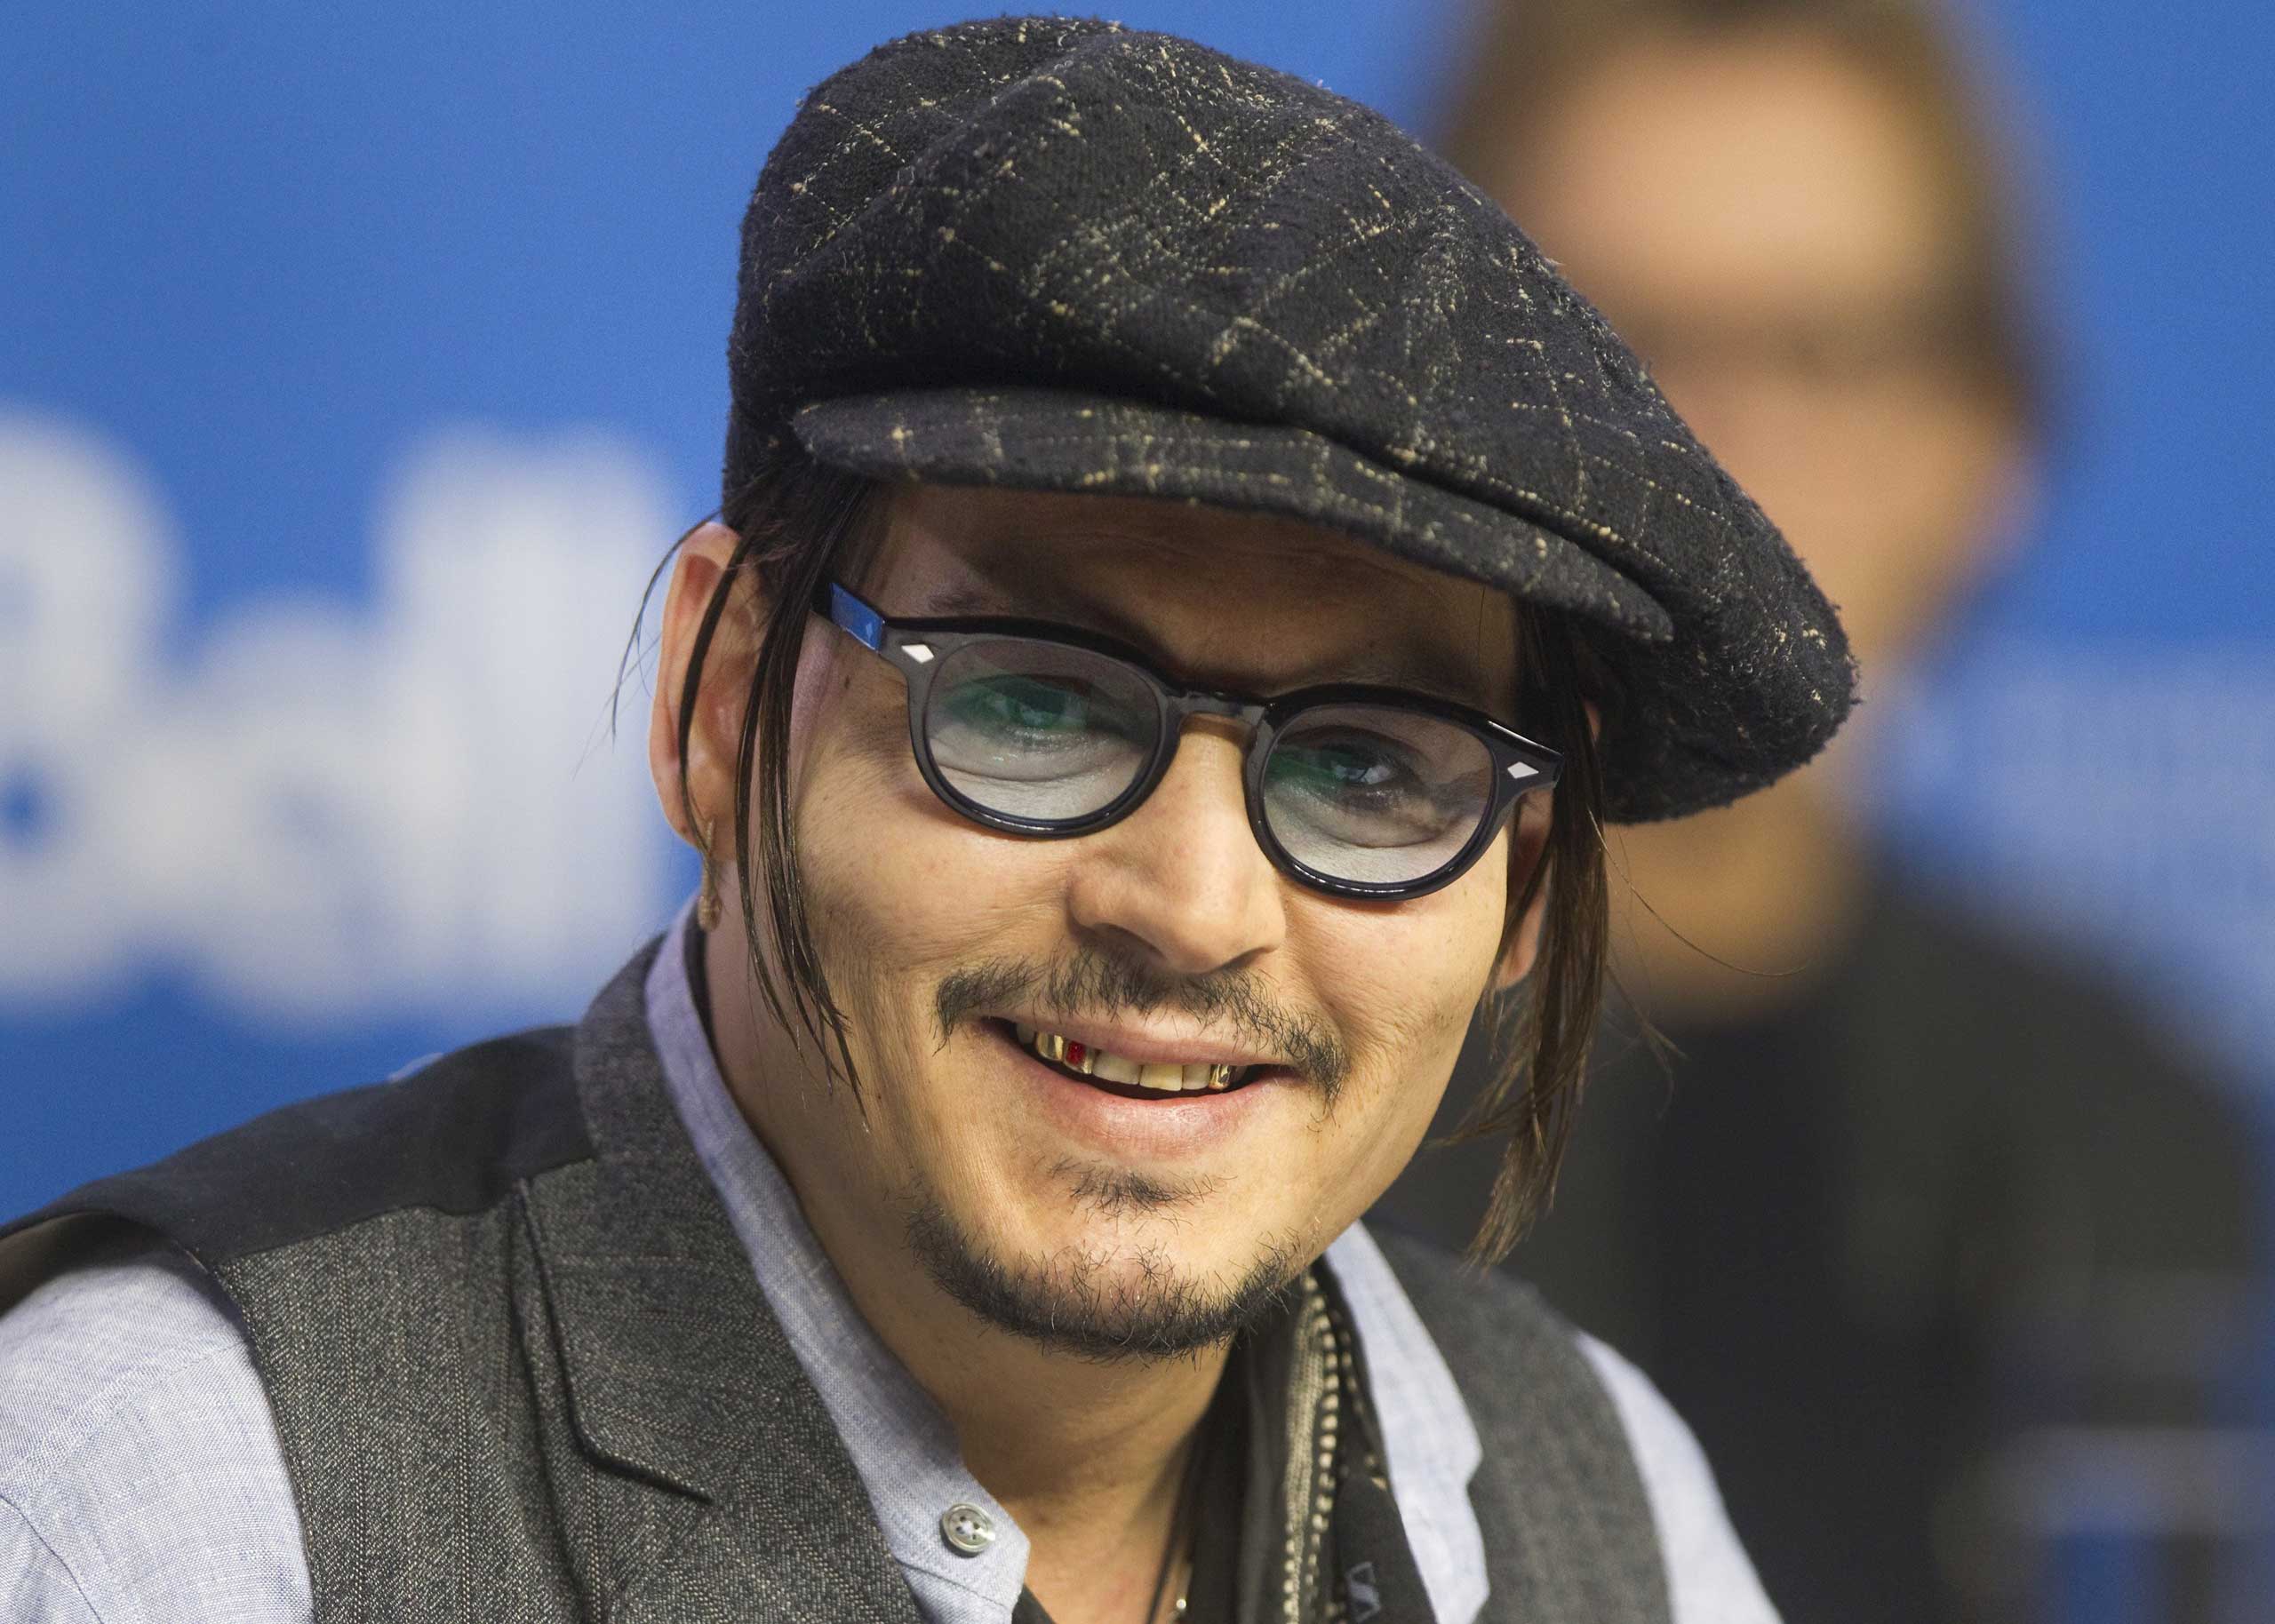 Johnny Depp attends a news conference to promote the film "Black Mass" at TIFF the Toronto International Film Festival in Toronto, Sept. 14, 2015. (Fred Thornhill—Reuters)